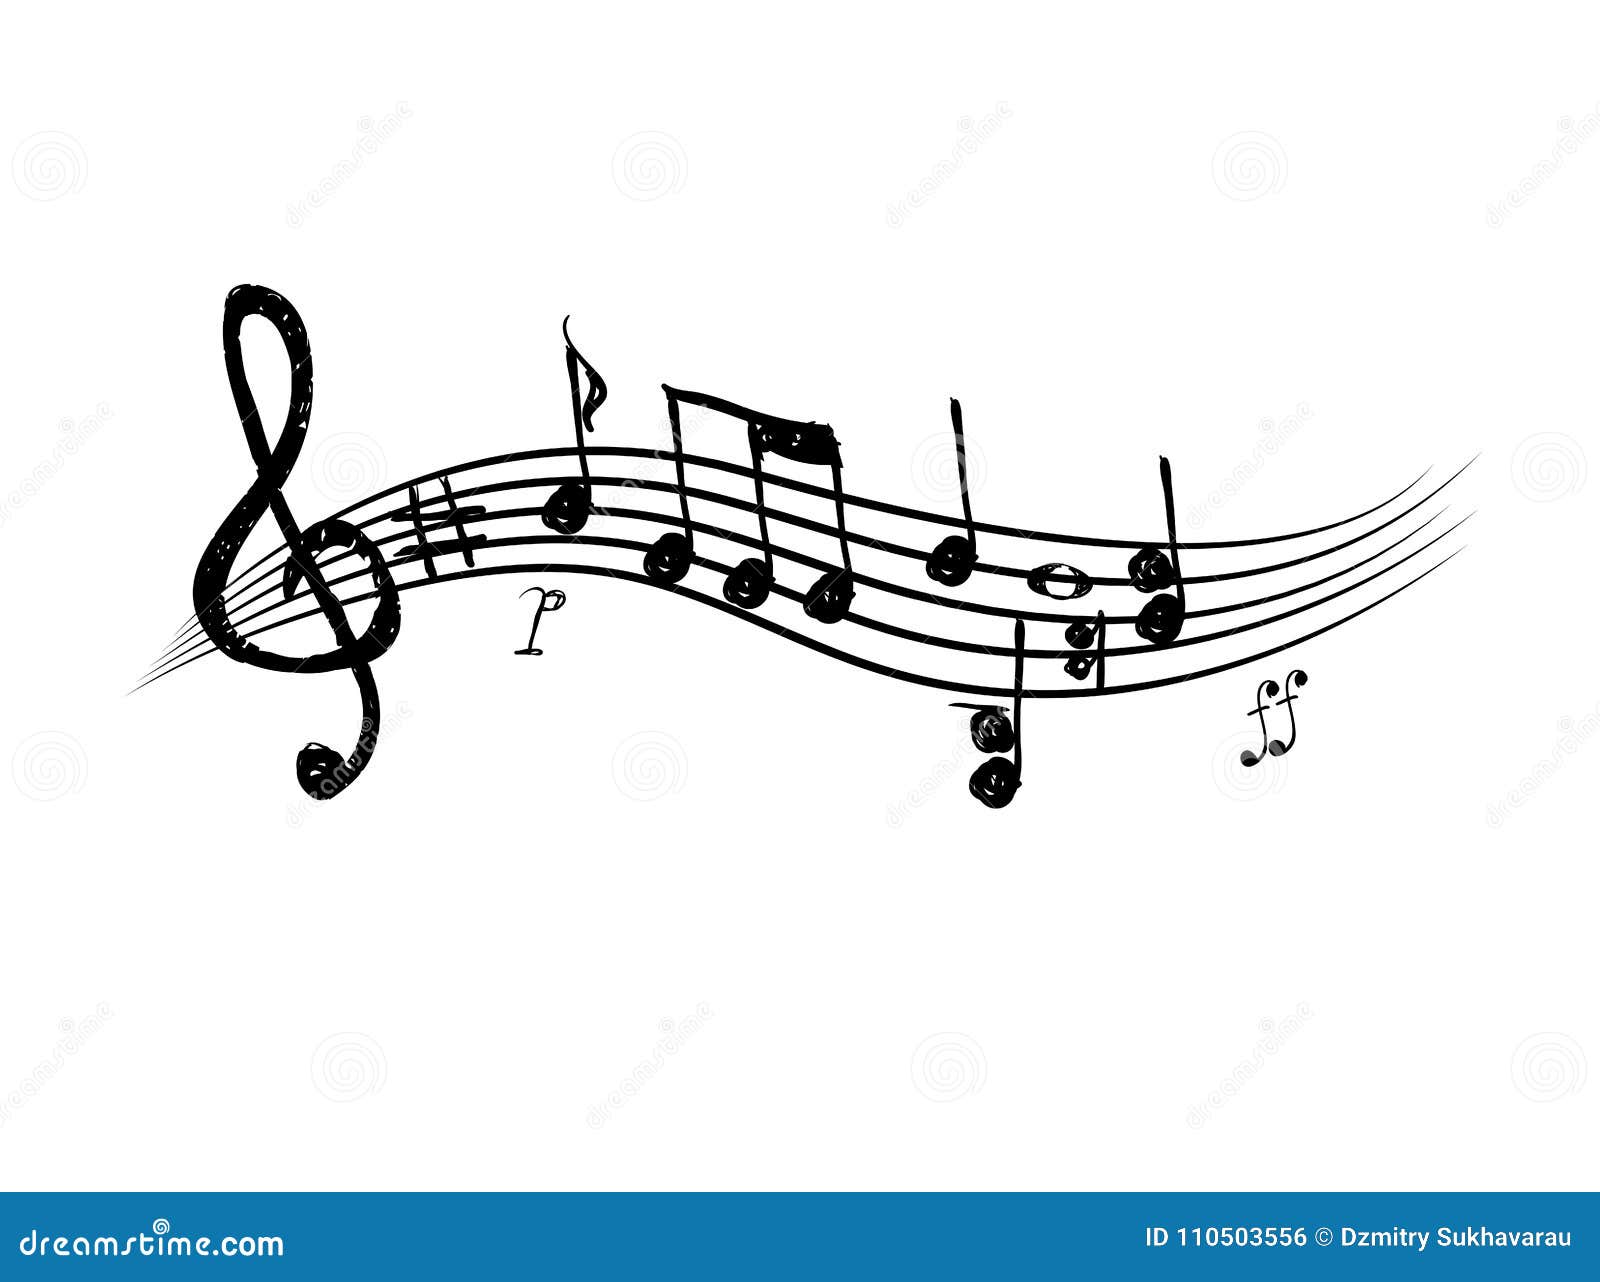 music note   in doodle style.